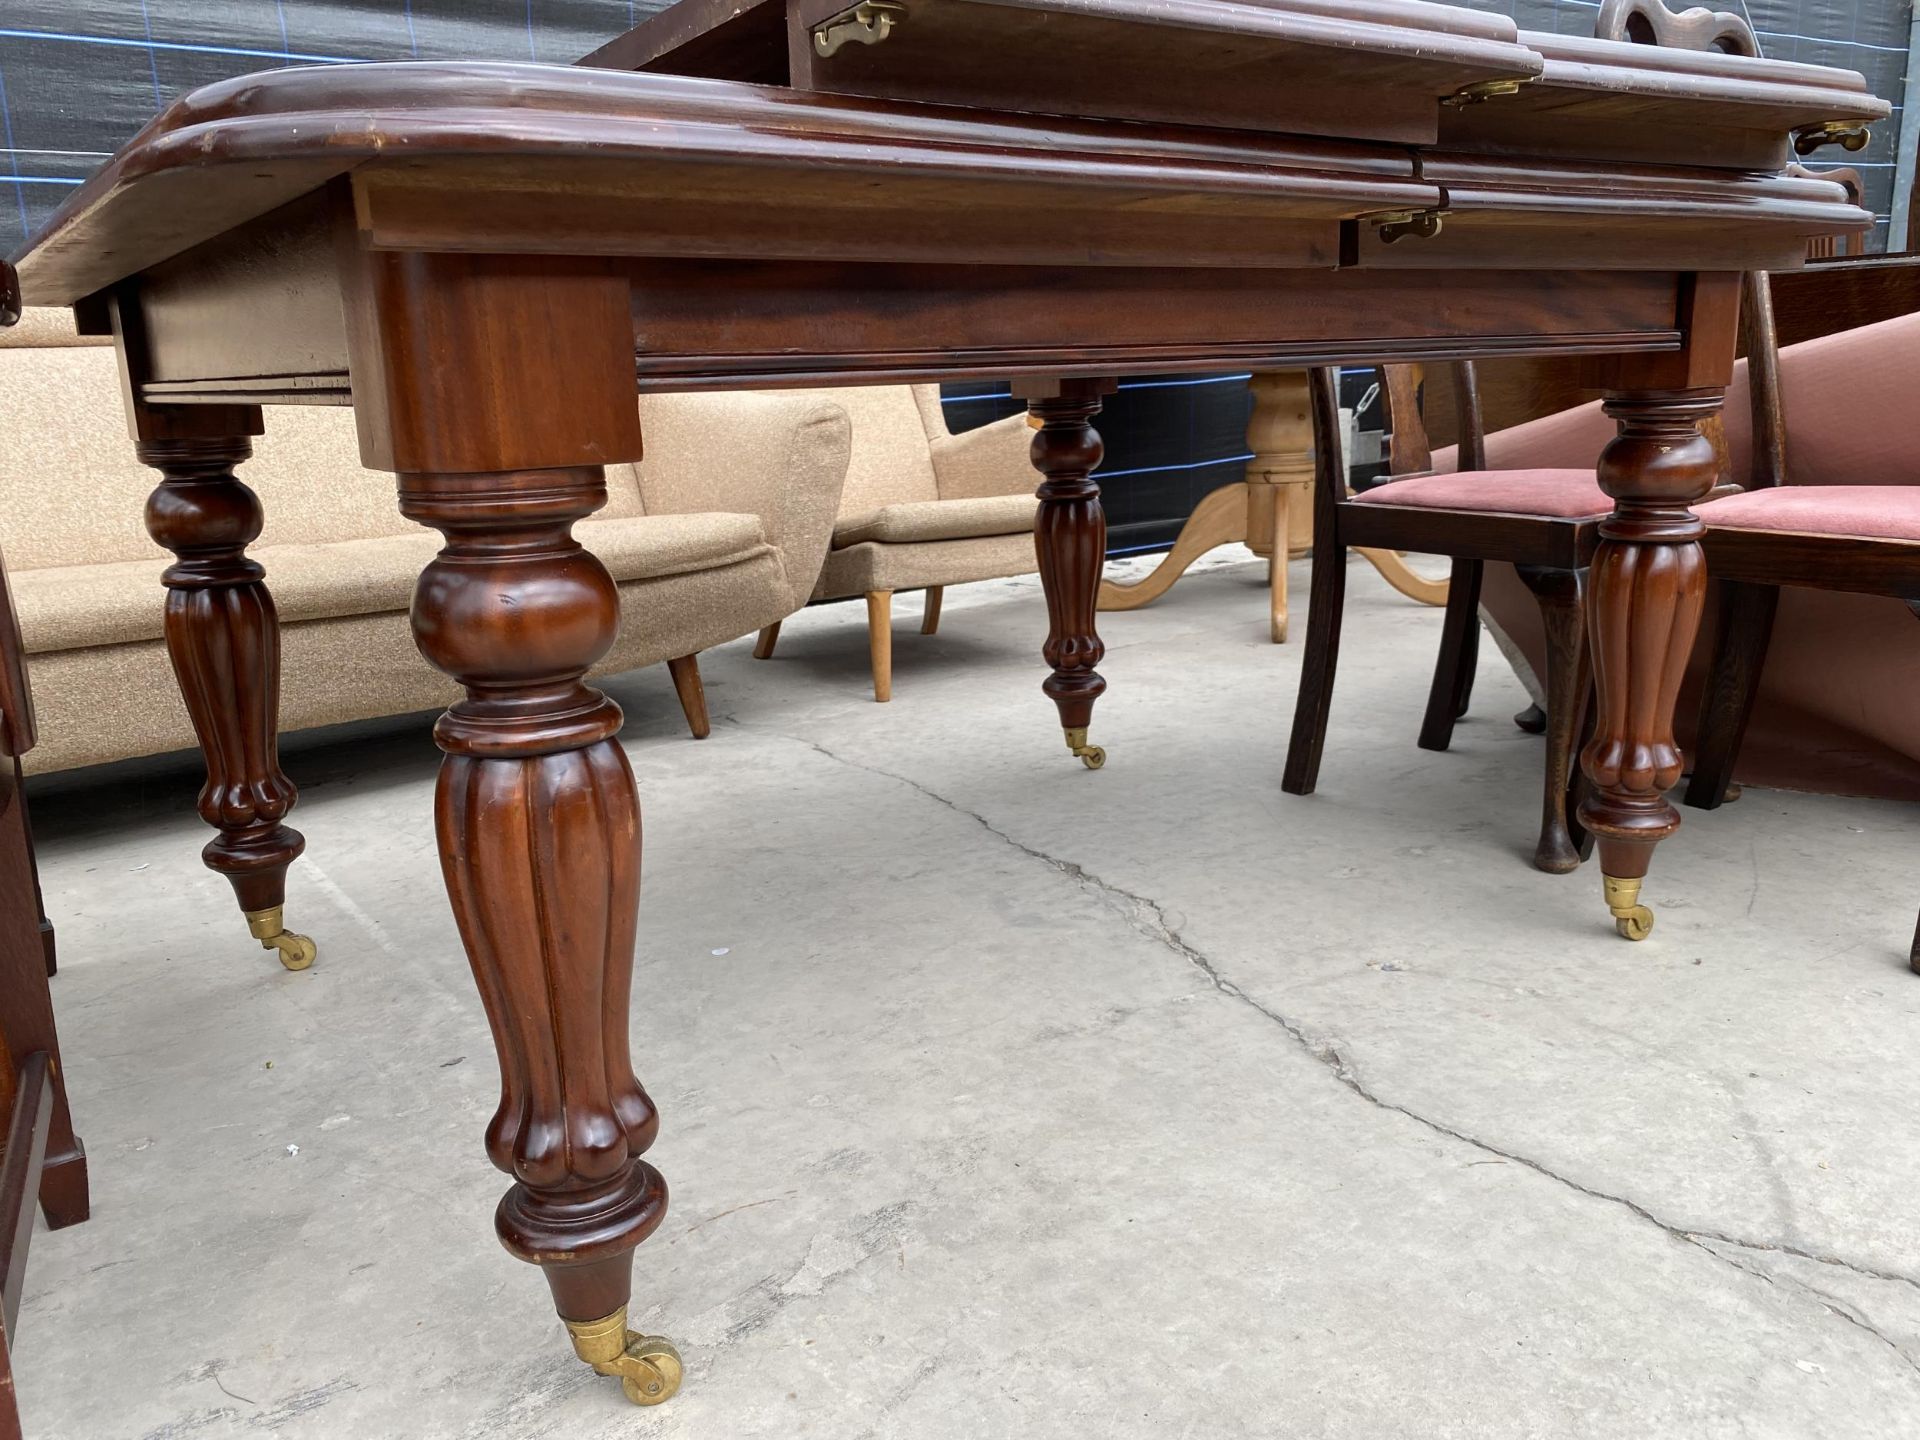 A VICTORIAN STYLE MAHOGANY PULL-OUT DINING TABLE, 59X48" (TWO LEAVES 19" EACH) - Image 3 of 3